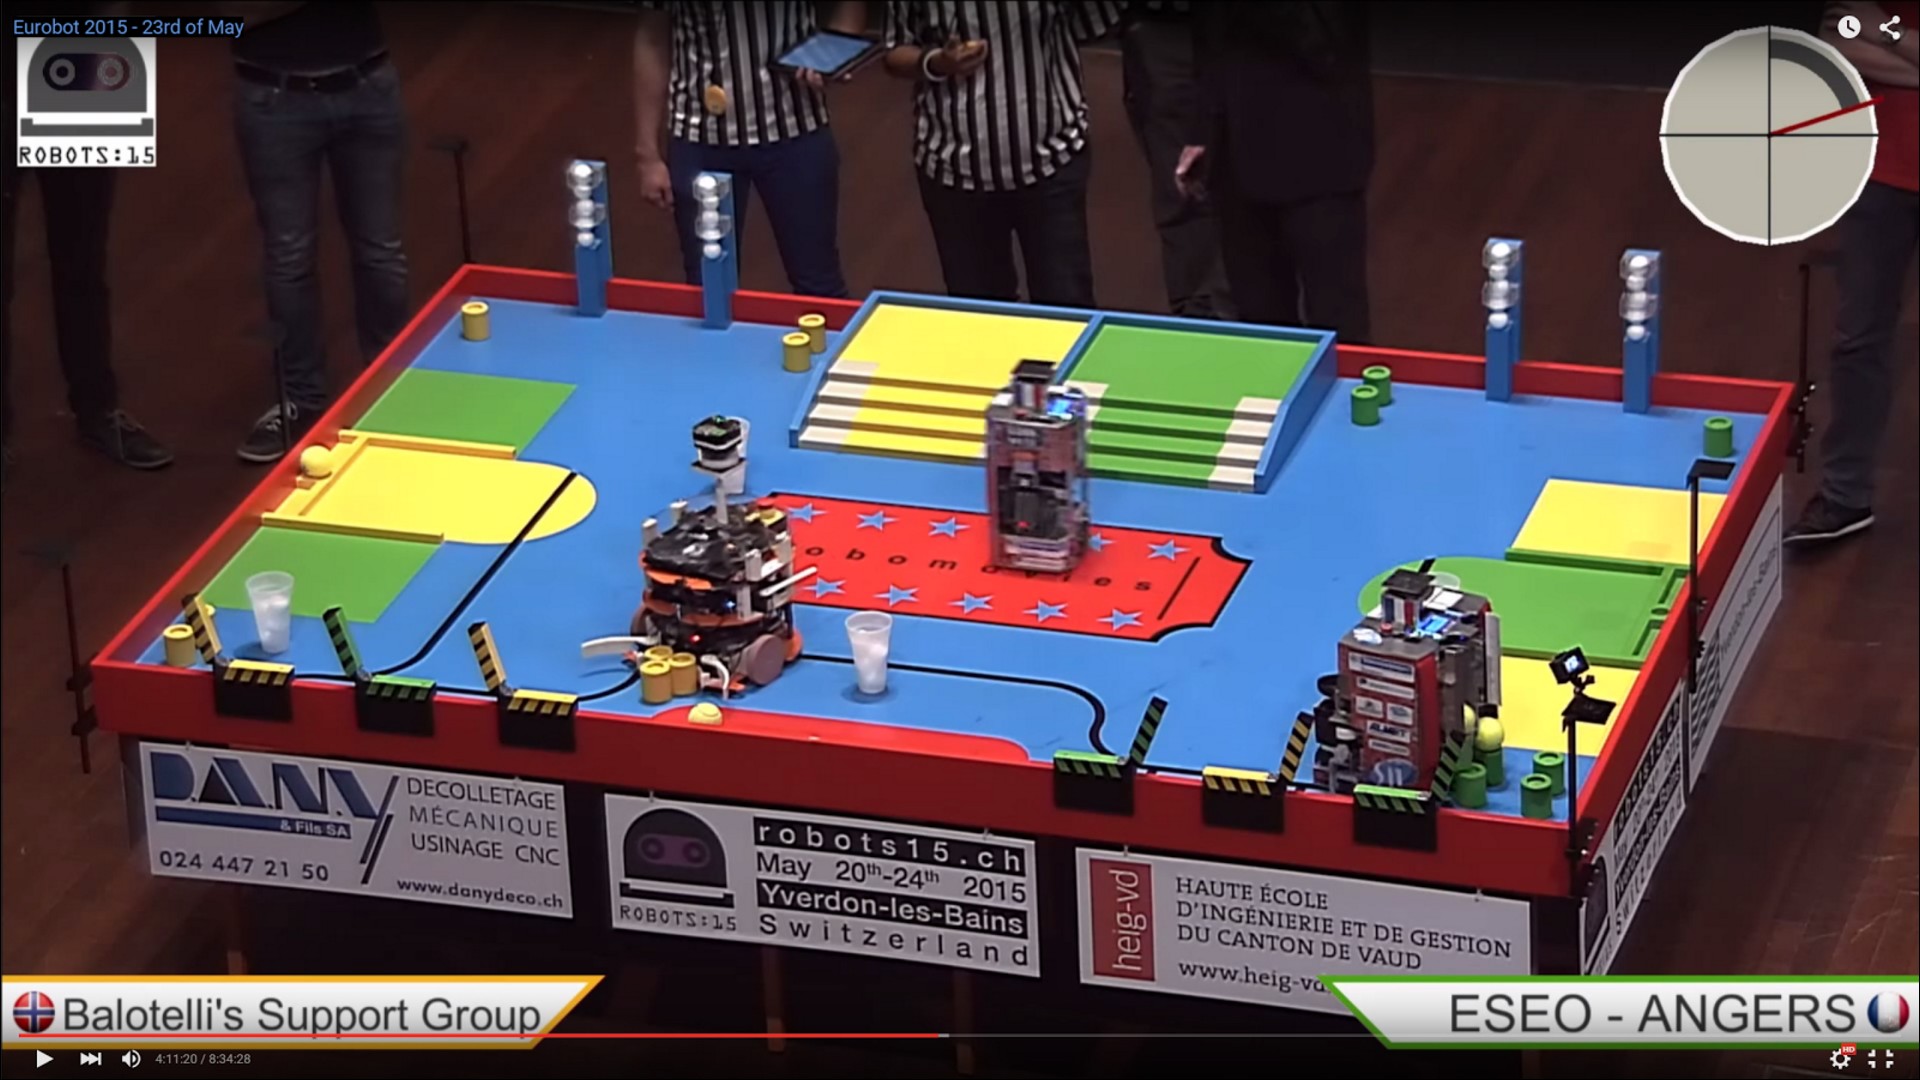 The UiO robot and the game board during the competition in France in 2015.